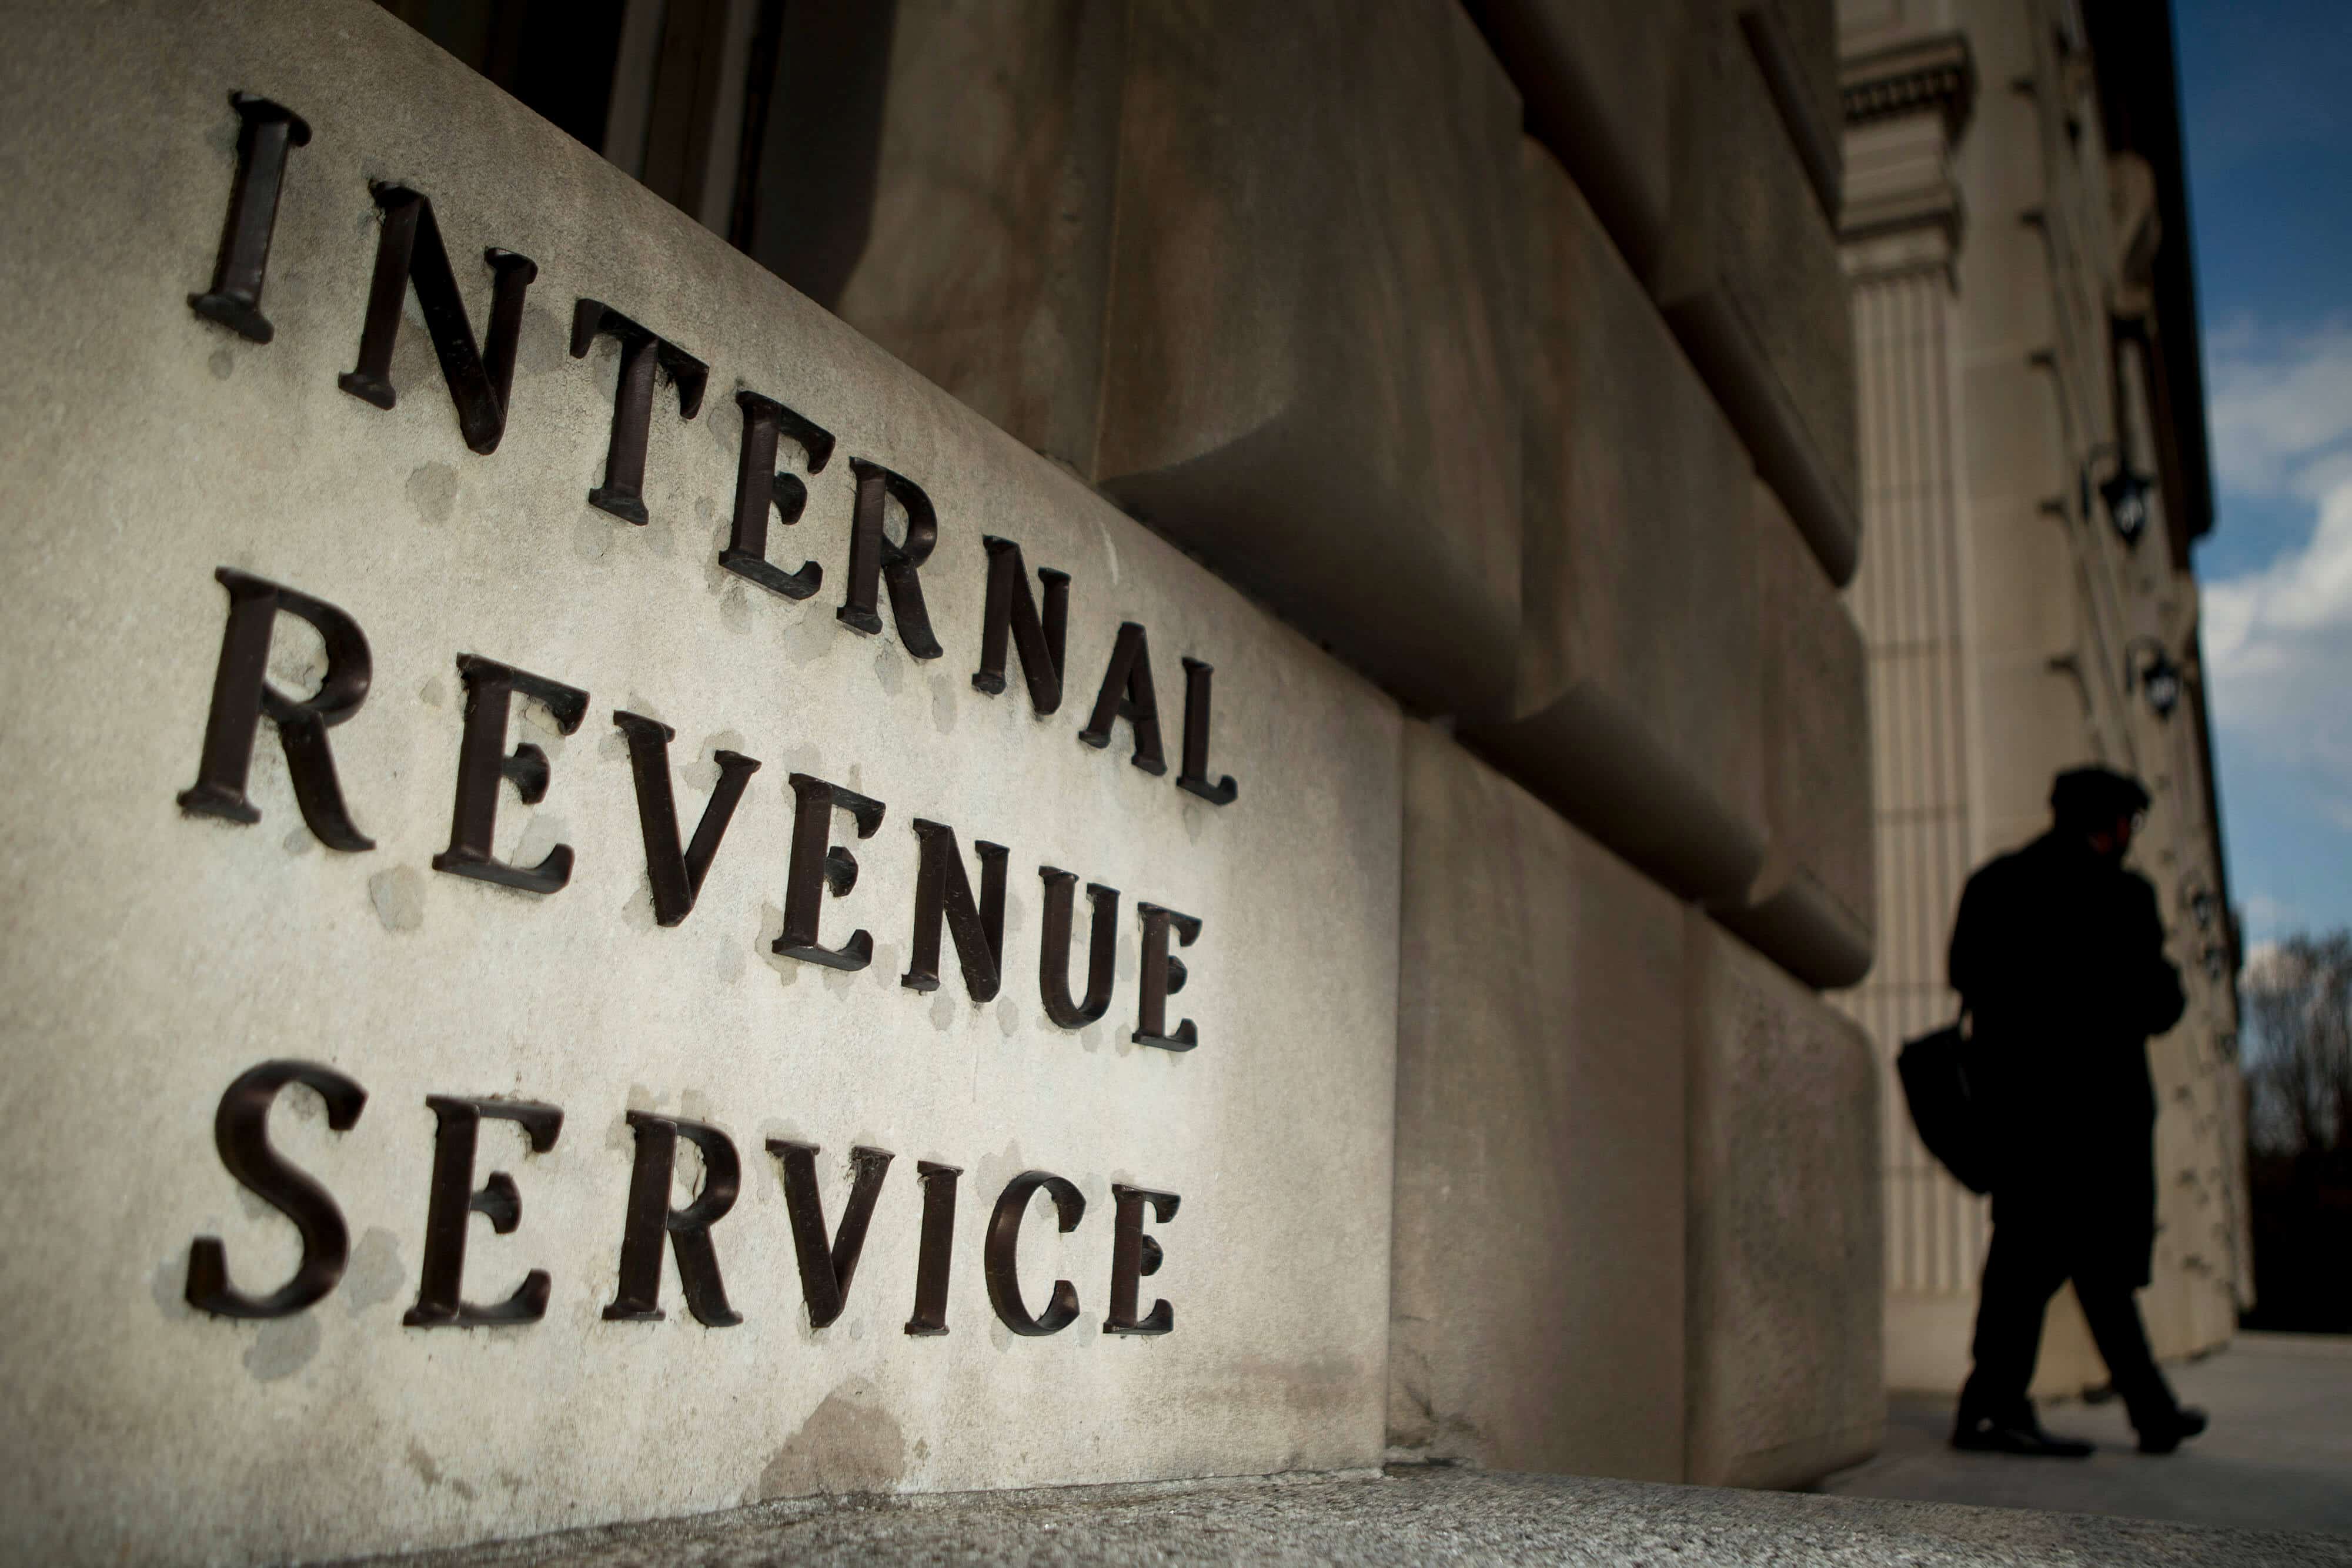 IRS Internal Revenue Service (IRS) Claims 91% Conviction Rate for Tax Crimes In 2019